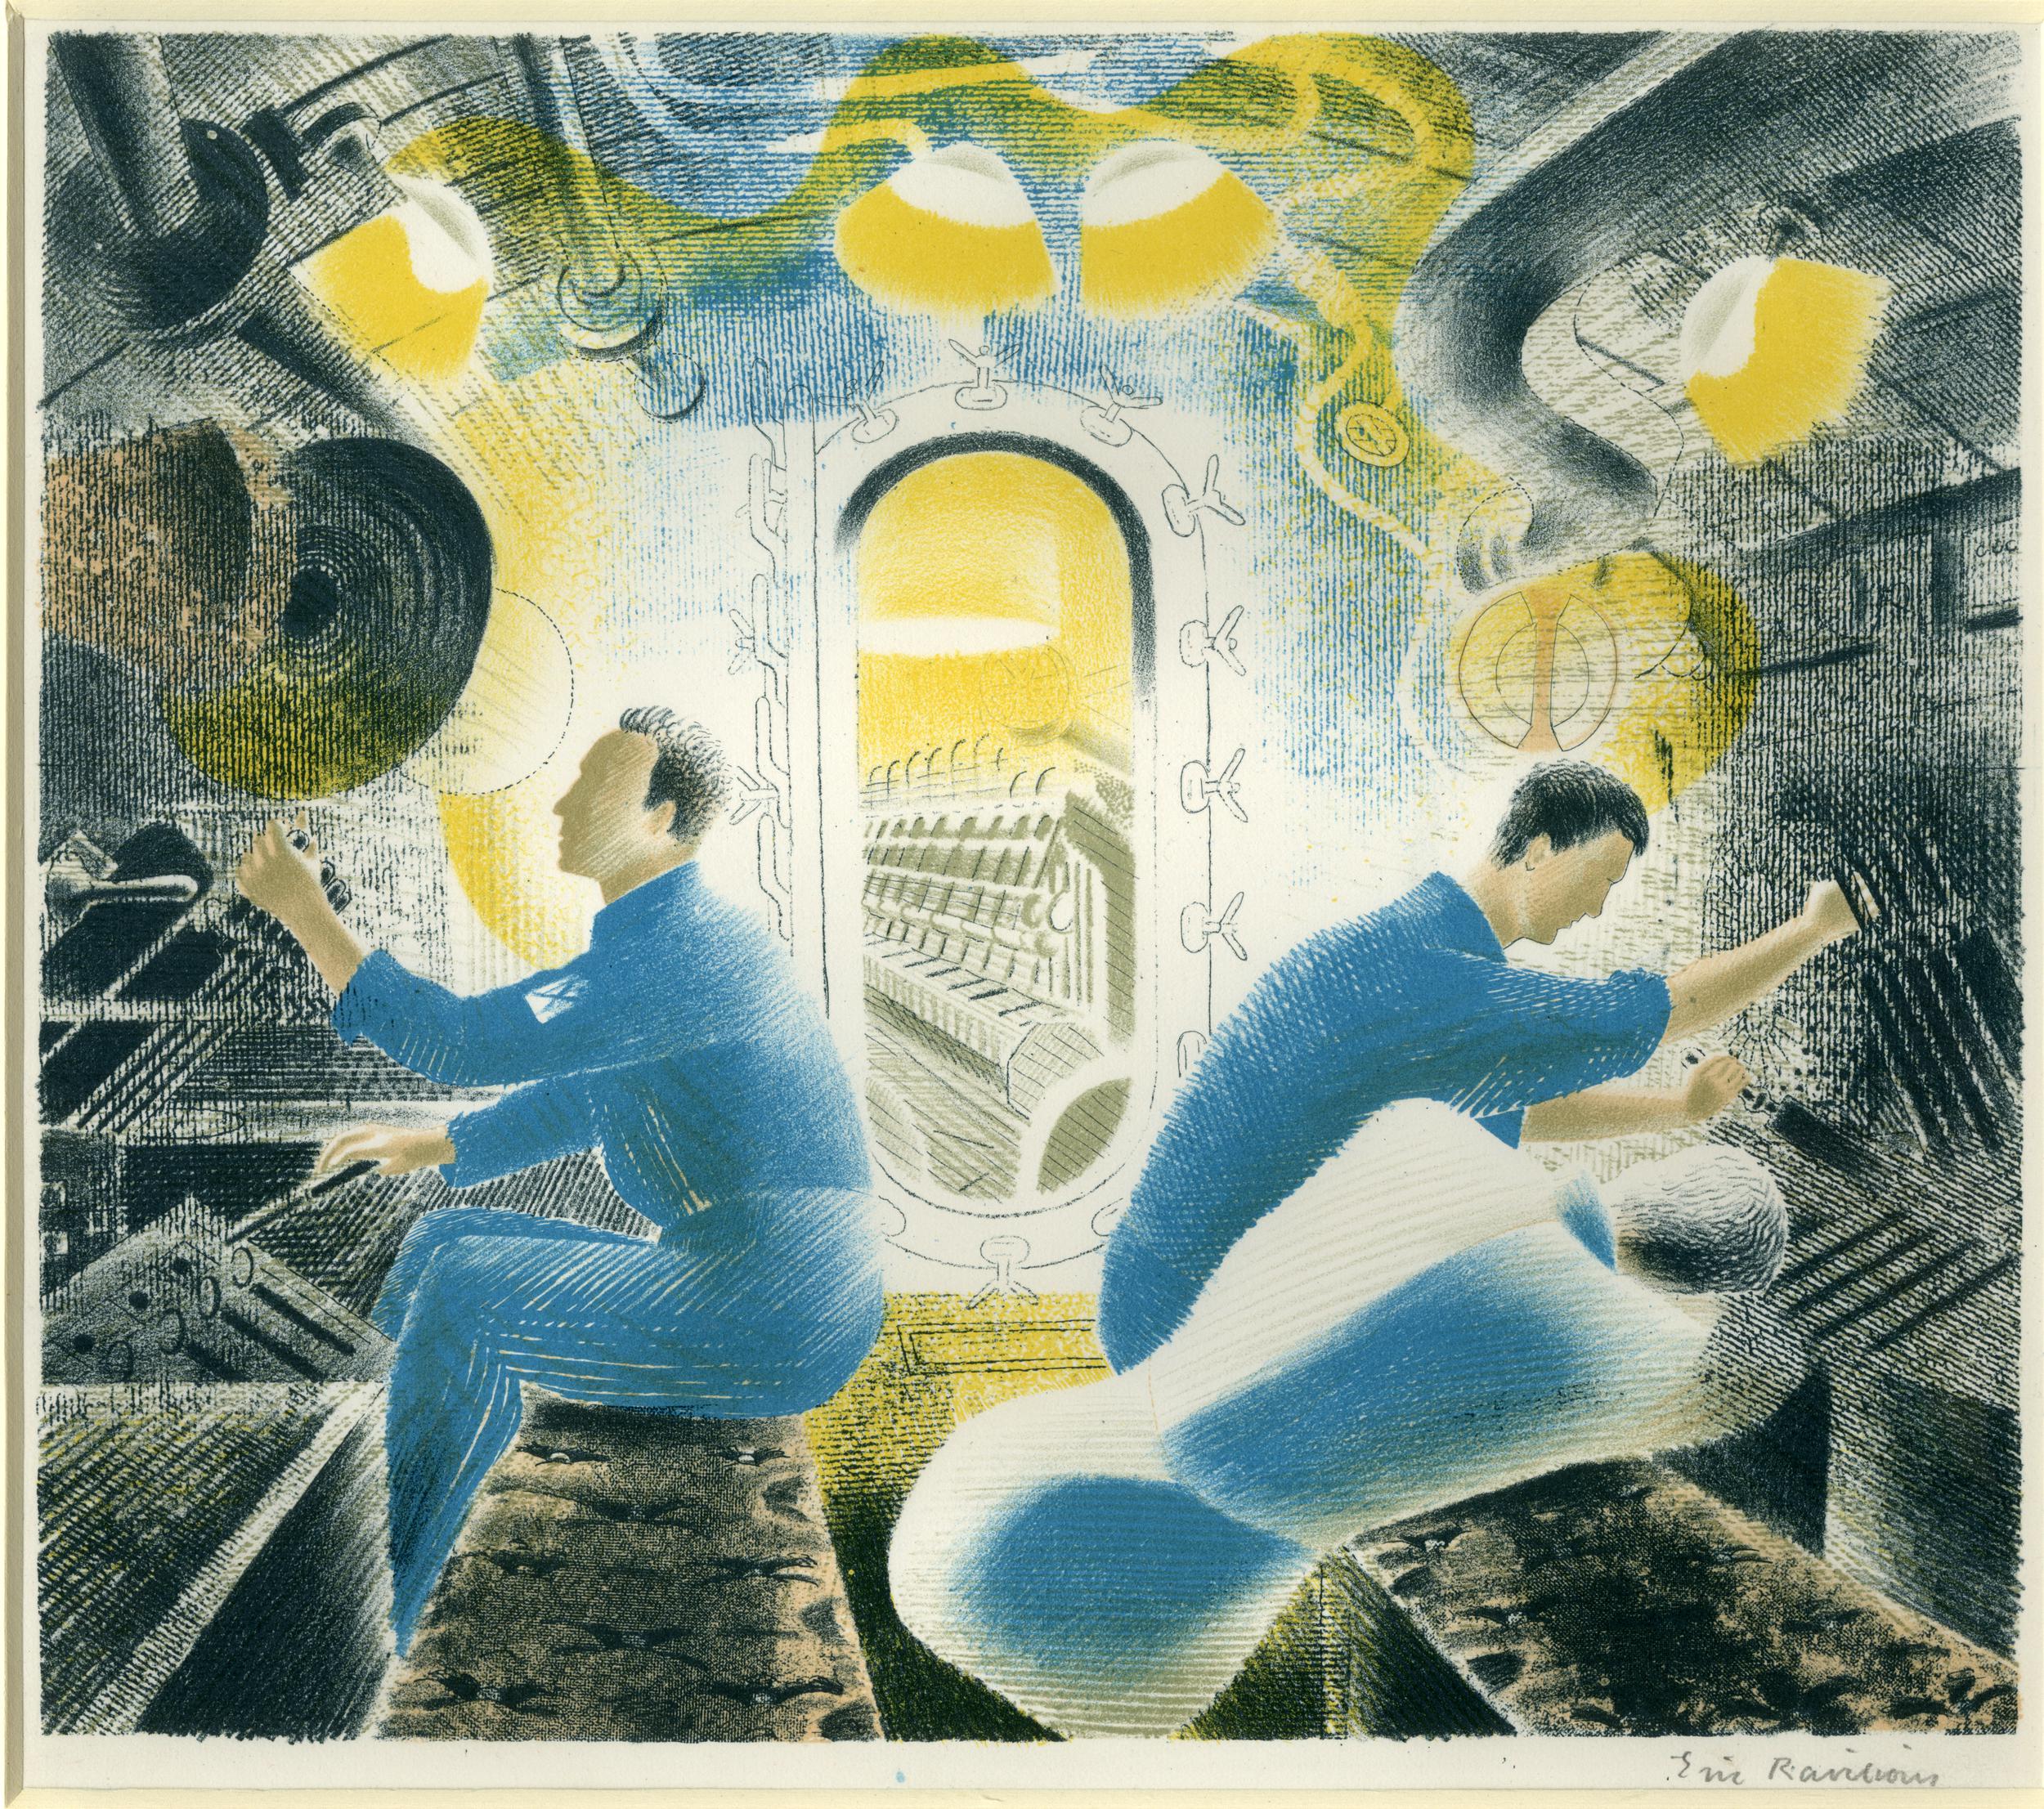 colour lithograph in predominantly dark blue, light blue and yellow